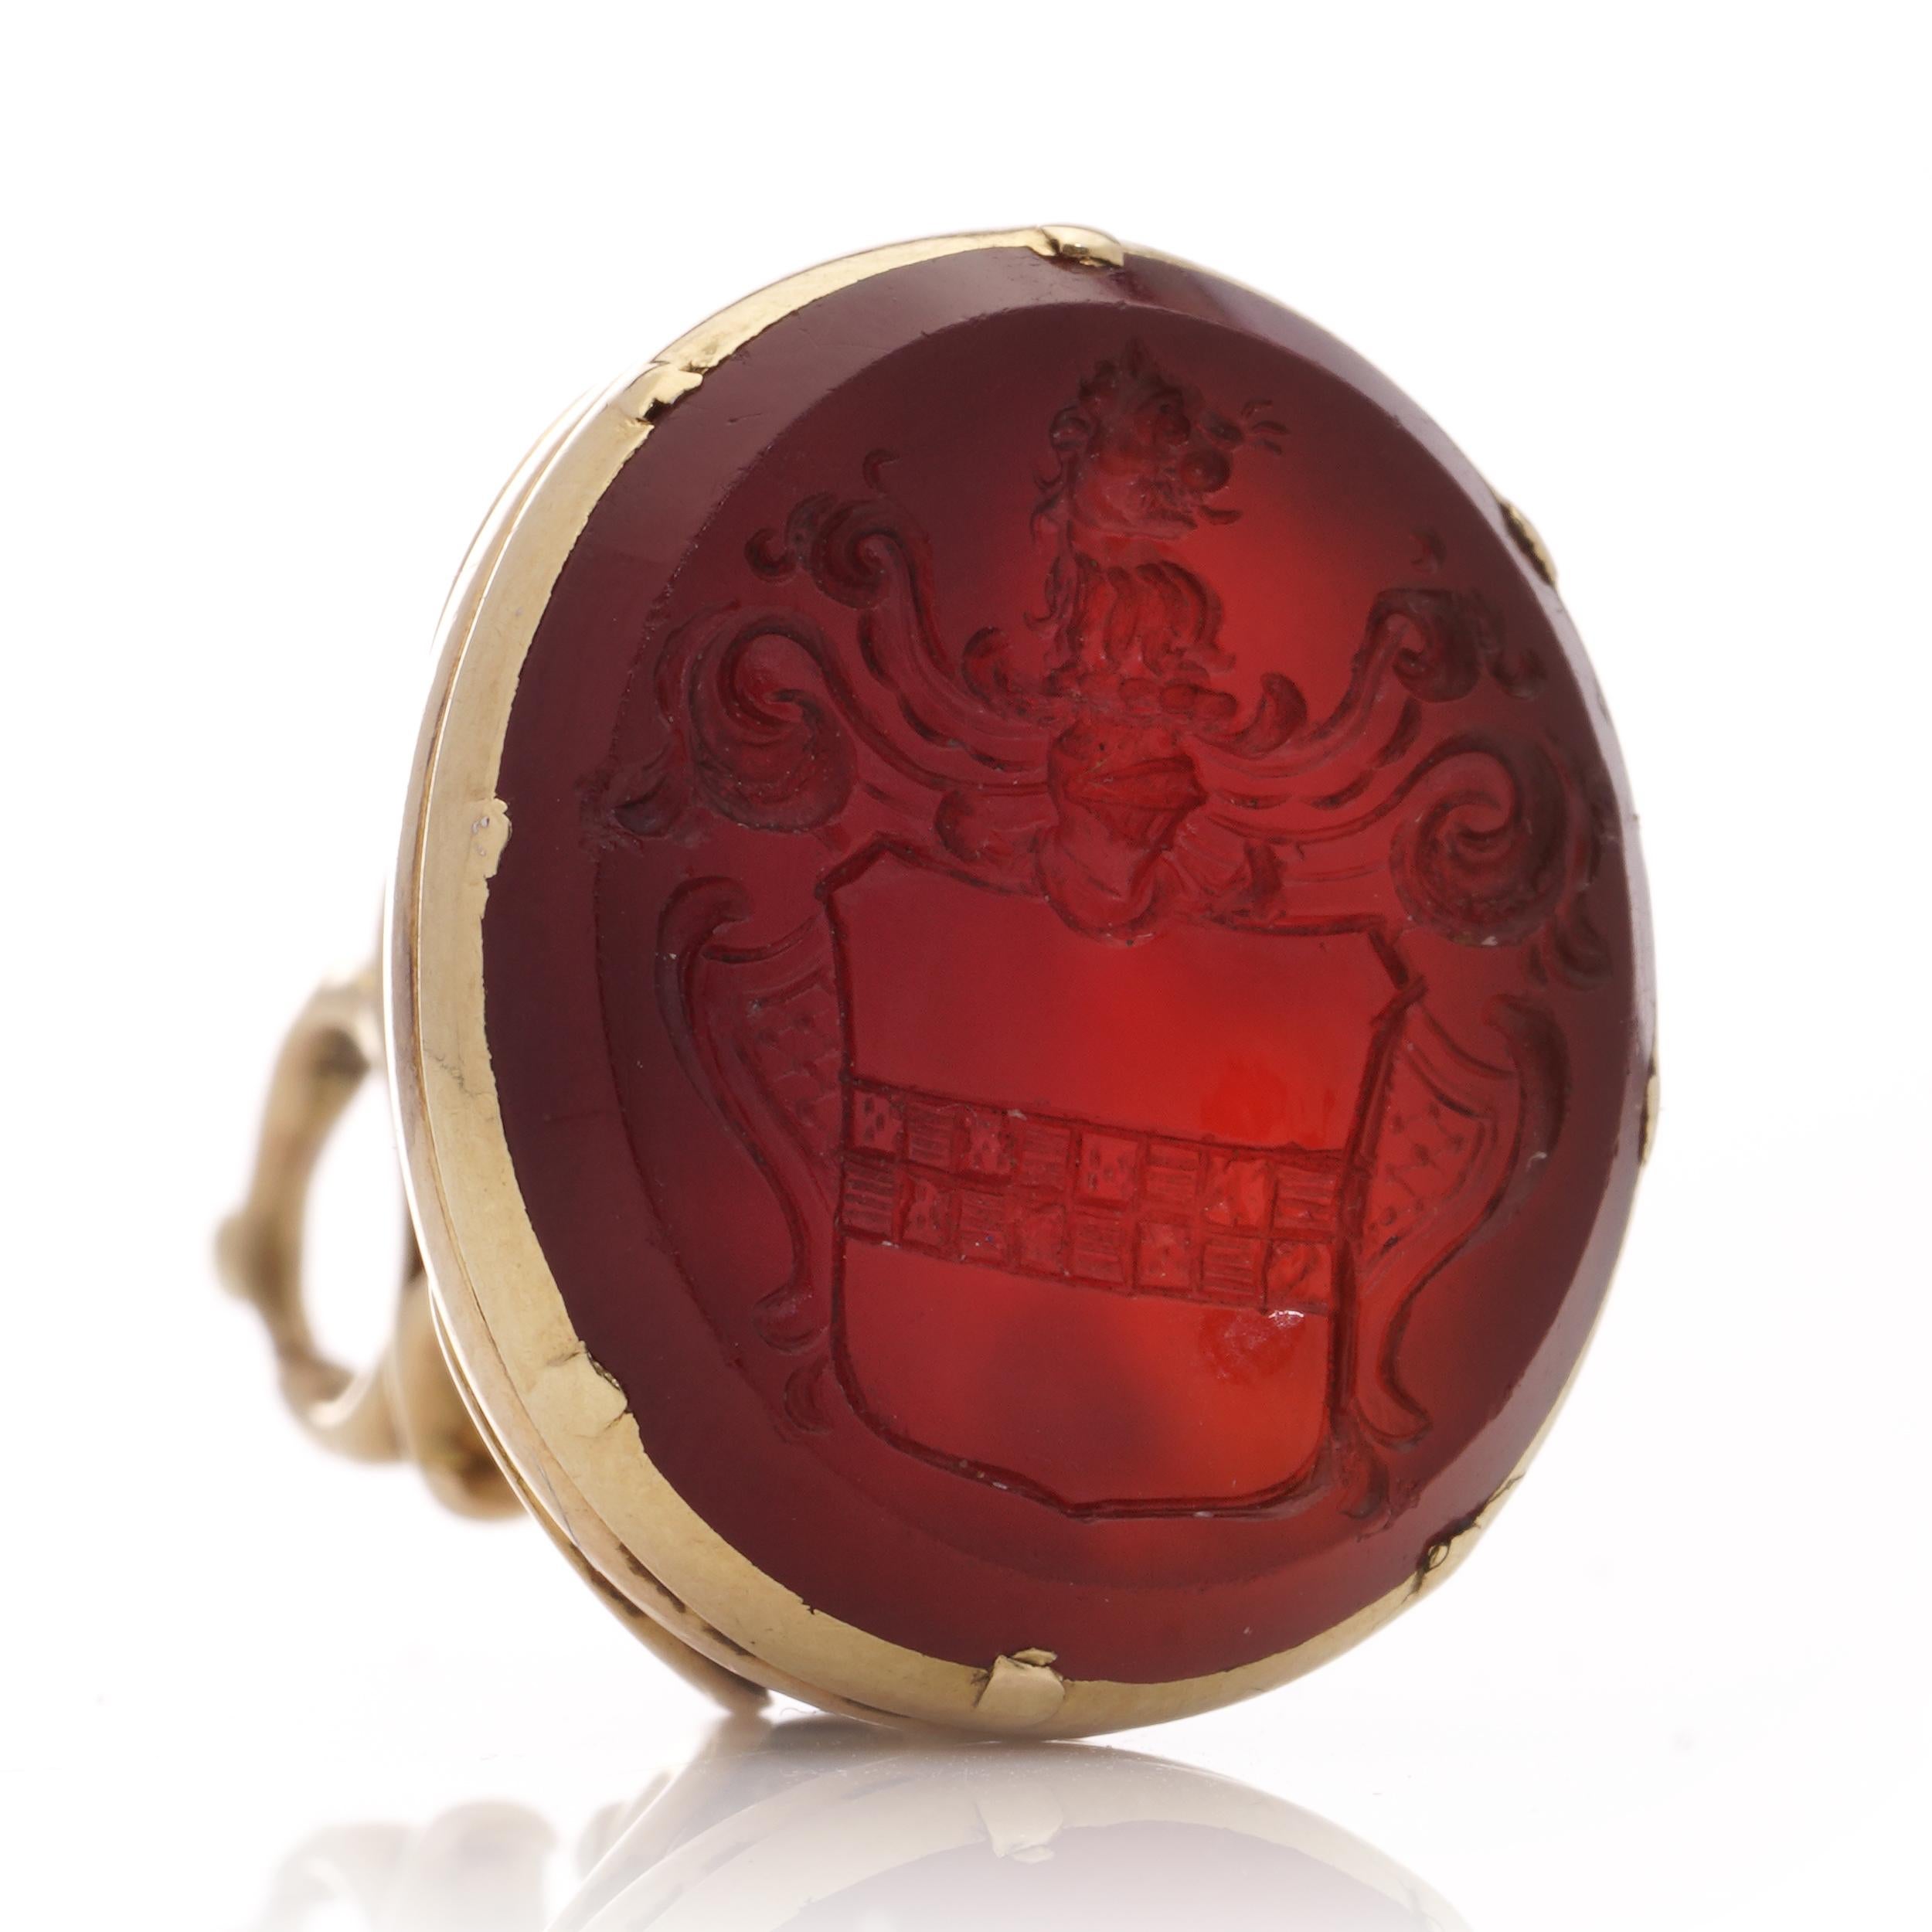 This antique 18th-century Georgian seal fob/pendant, crafted from 18kt. yellow gold features a Carnelian intaglio depicting an armorial coat of arms.
X- ray been tested for 18kt gold. 

Dimensions:
height x width x depth: 3 x 2.1 x 1.8 cm 
Weight: